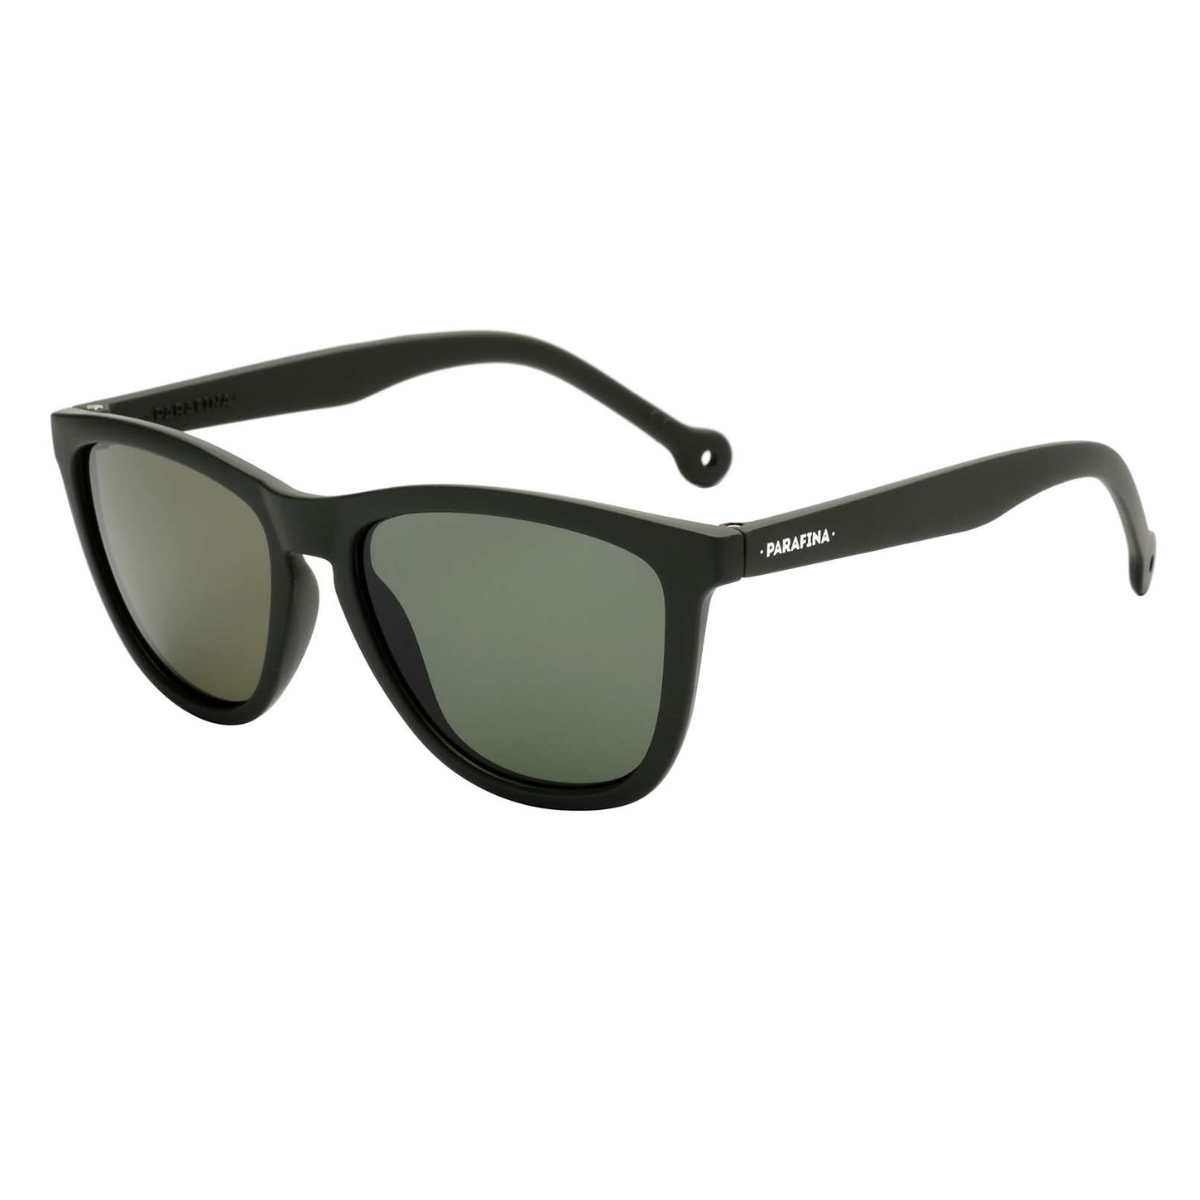 Parafina - Sonnenbrille Travesia Recycled Rubber Green - Nahmoo